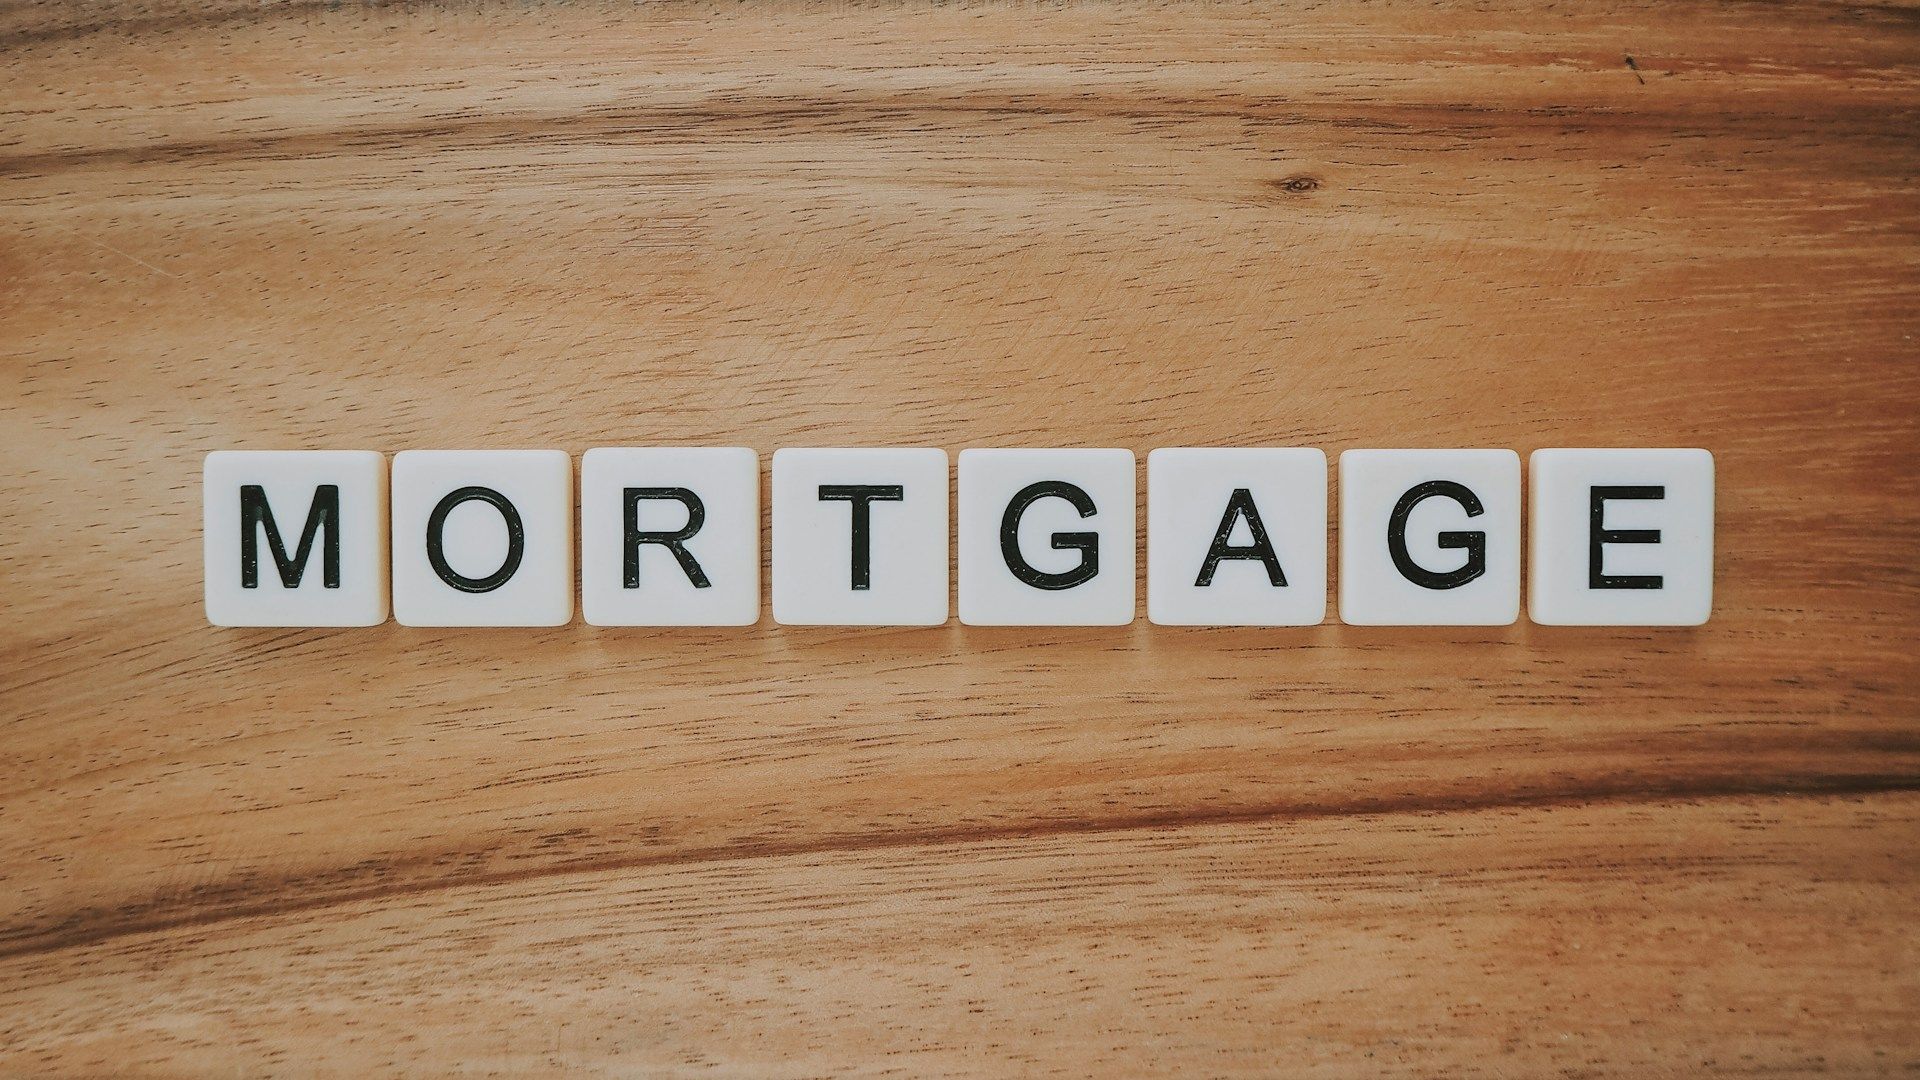 The word "Mortgage" spelled in letter tiles